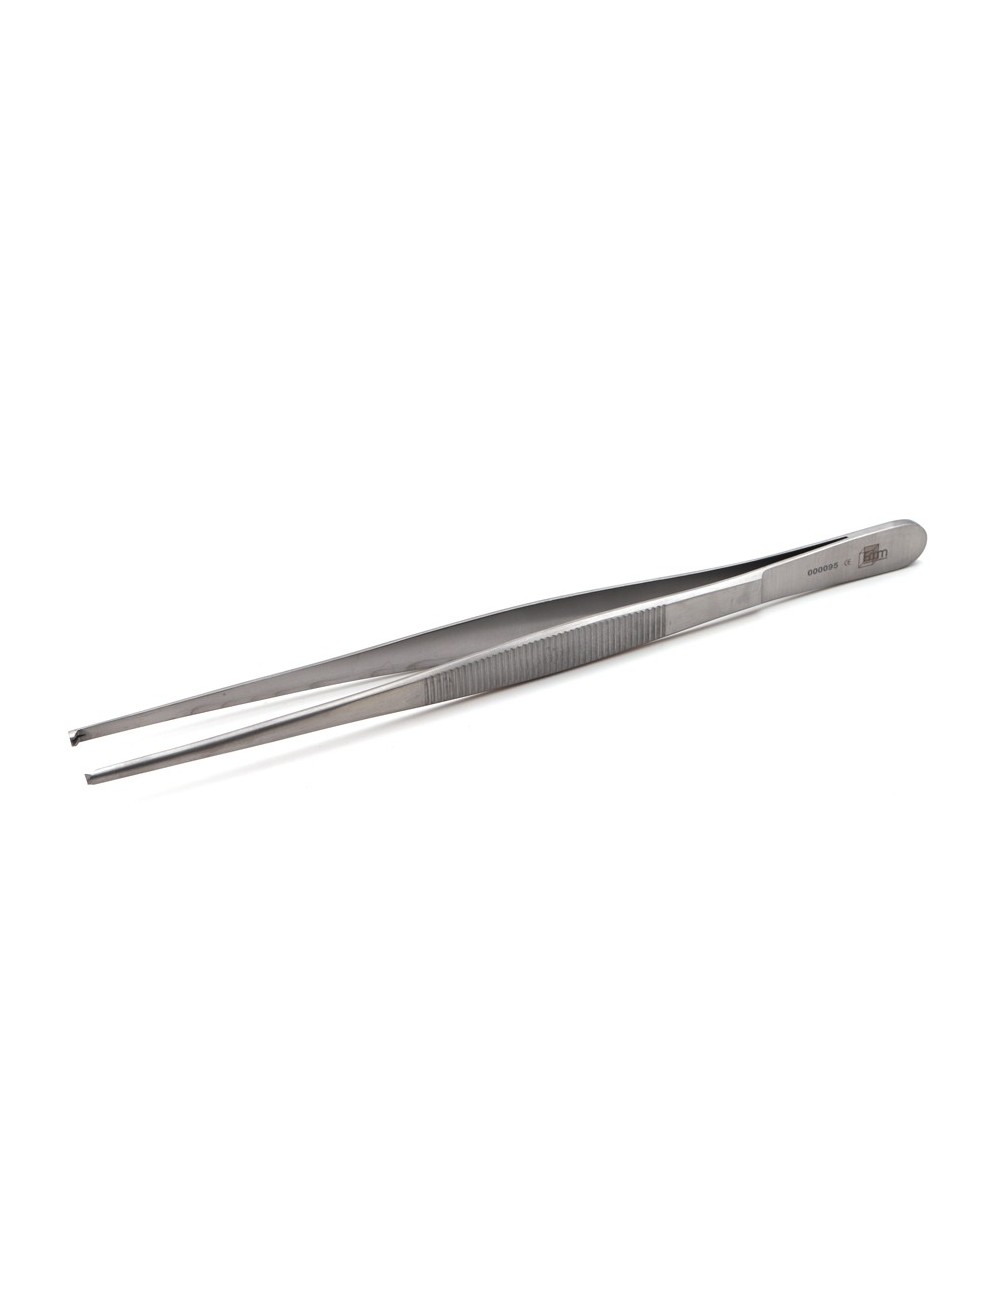 PINCE DISSECTION FINE A/G 20 CM